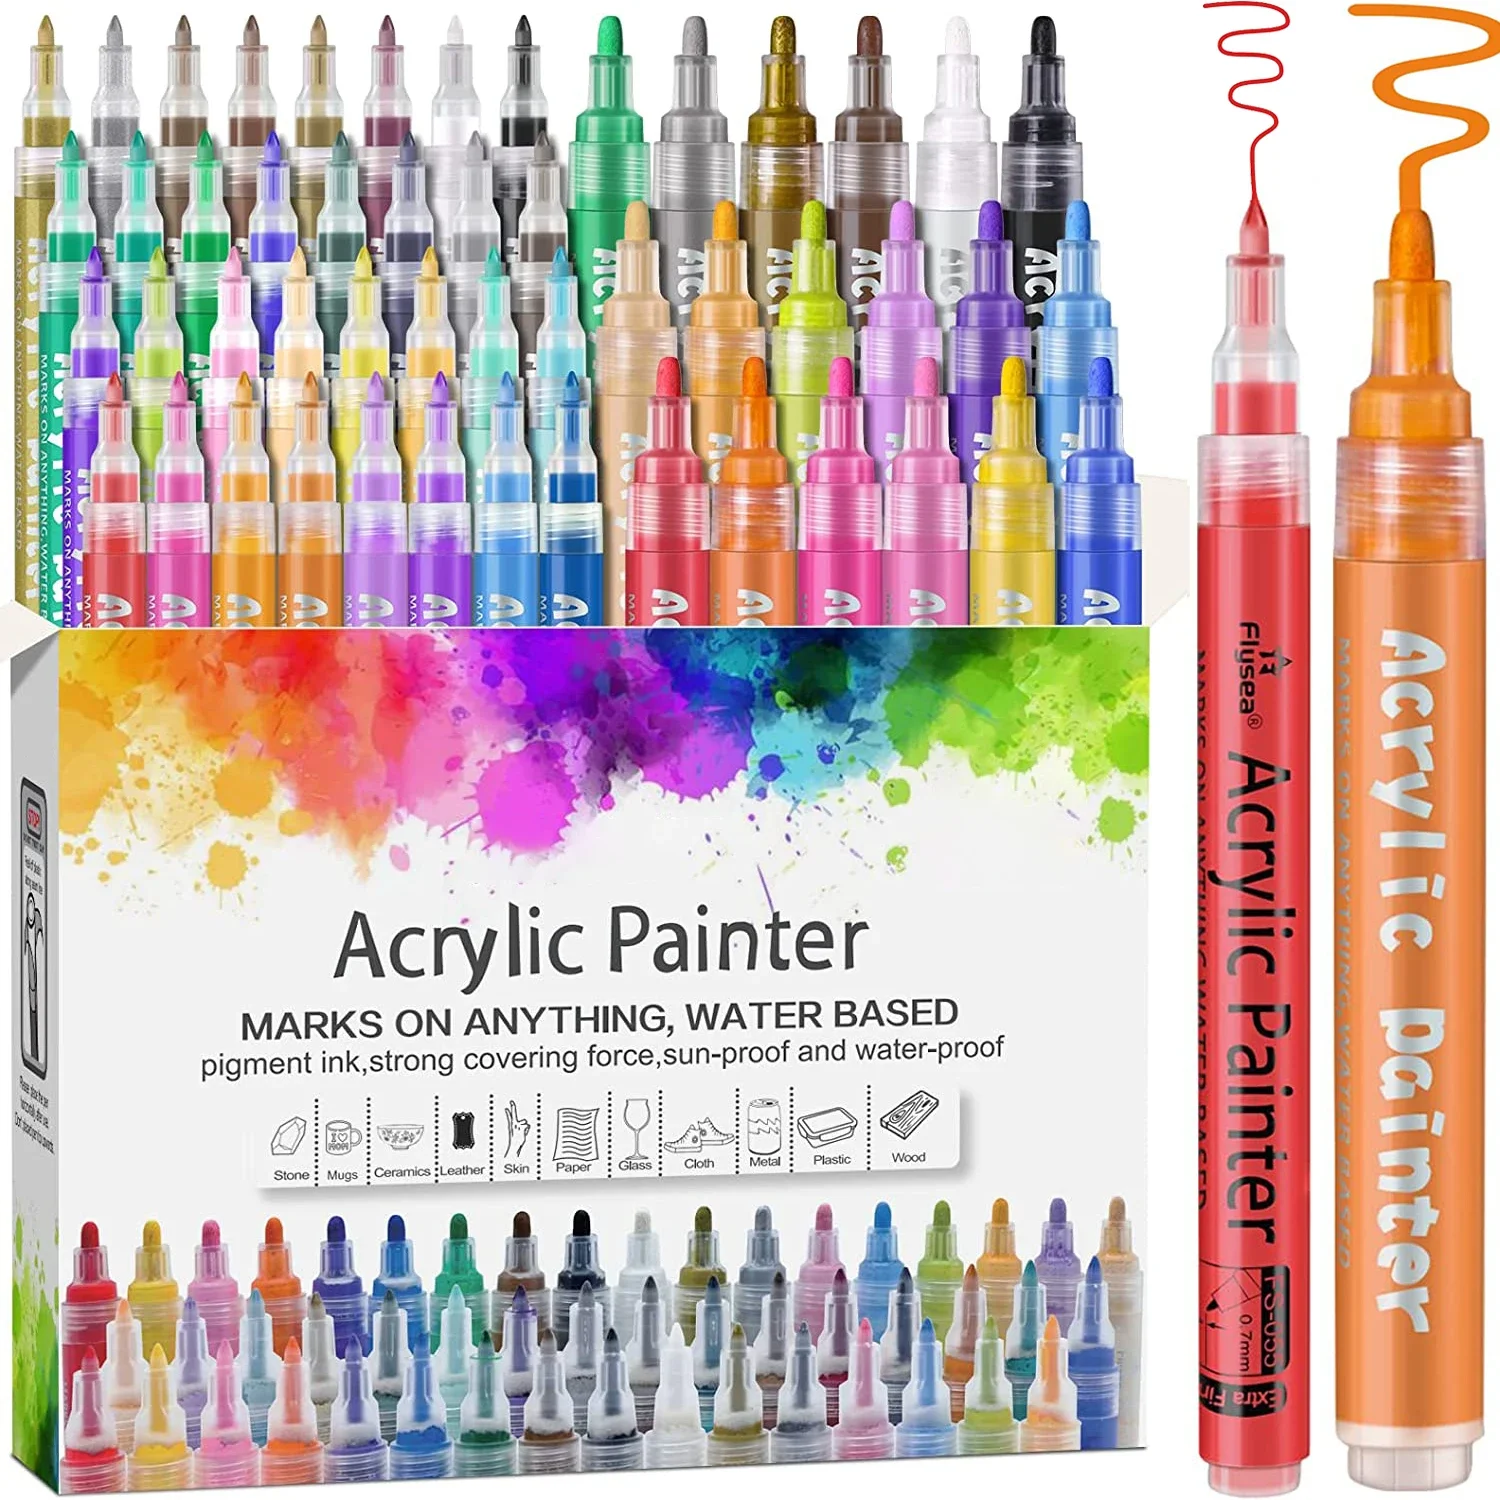 Acrylic Markers, Acrylic Paint Pen Premium Paint Pens Water Based Extra Fine and Medium Tip, Paint Art Markers Set Art Supplies pebeo 500ml oil paint medium clear varnish linseed oil mineral oil thinner inodore odorless thinner drawing auxiliary supplies